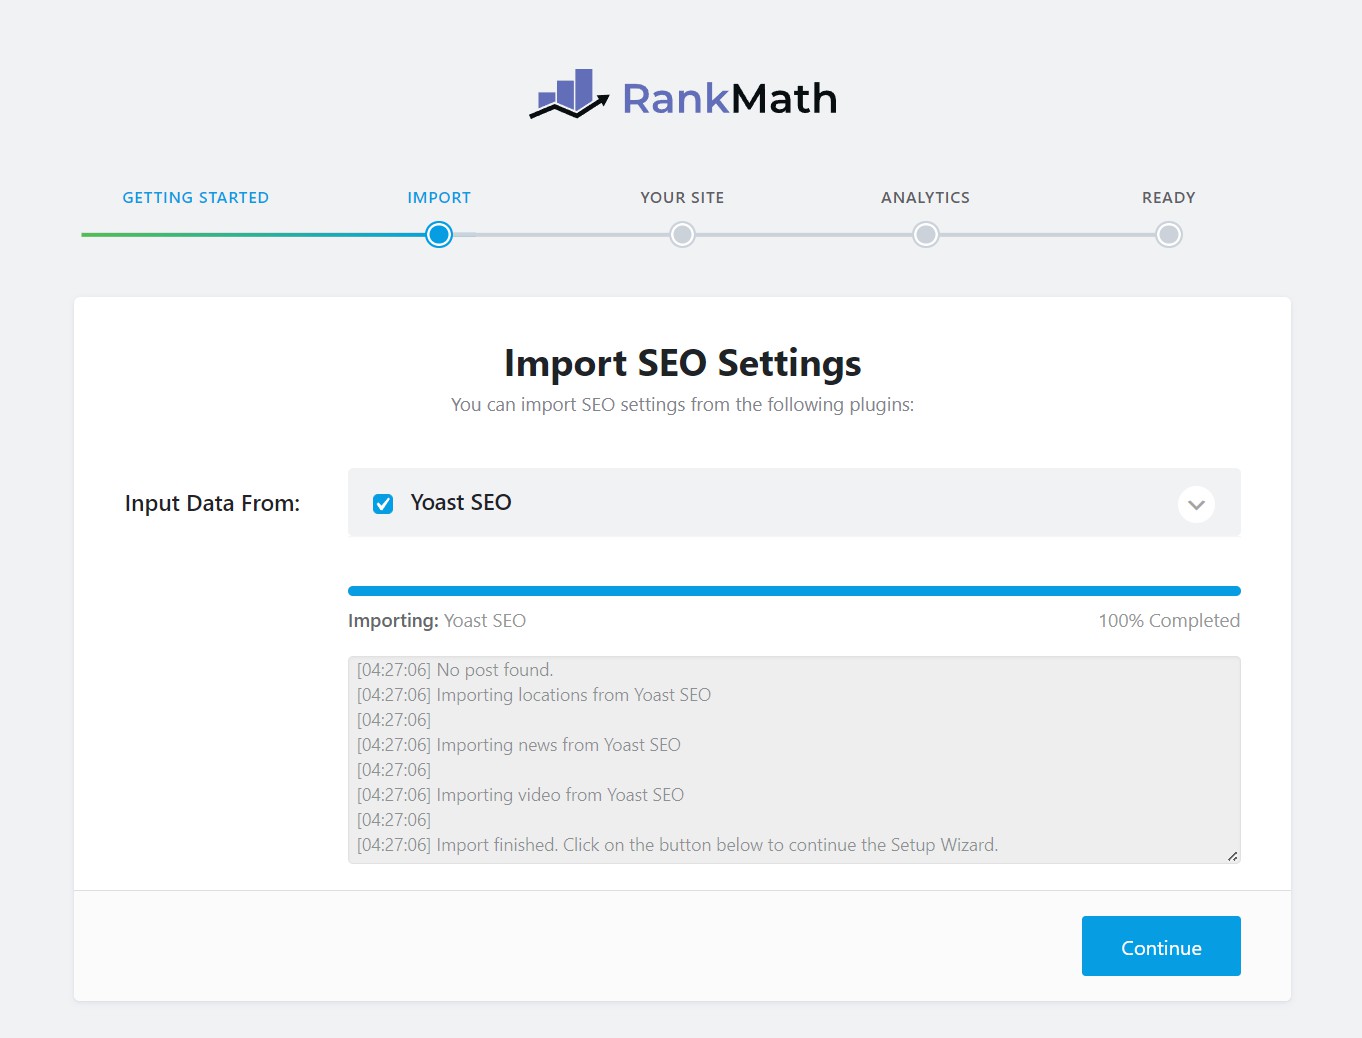 RankMath's Setup Wizard is easy to use